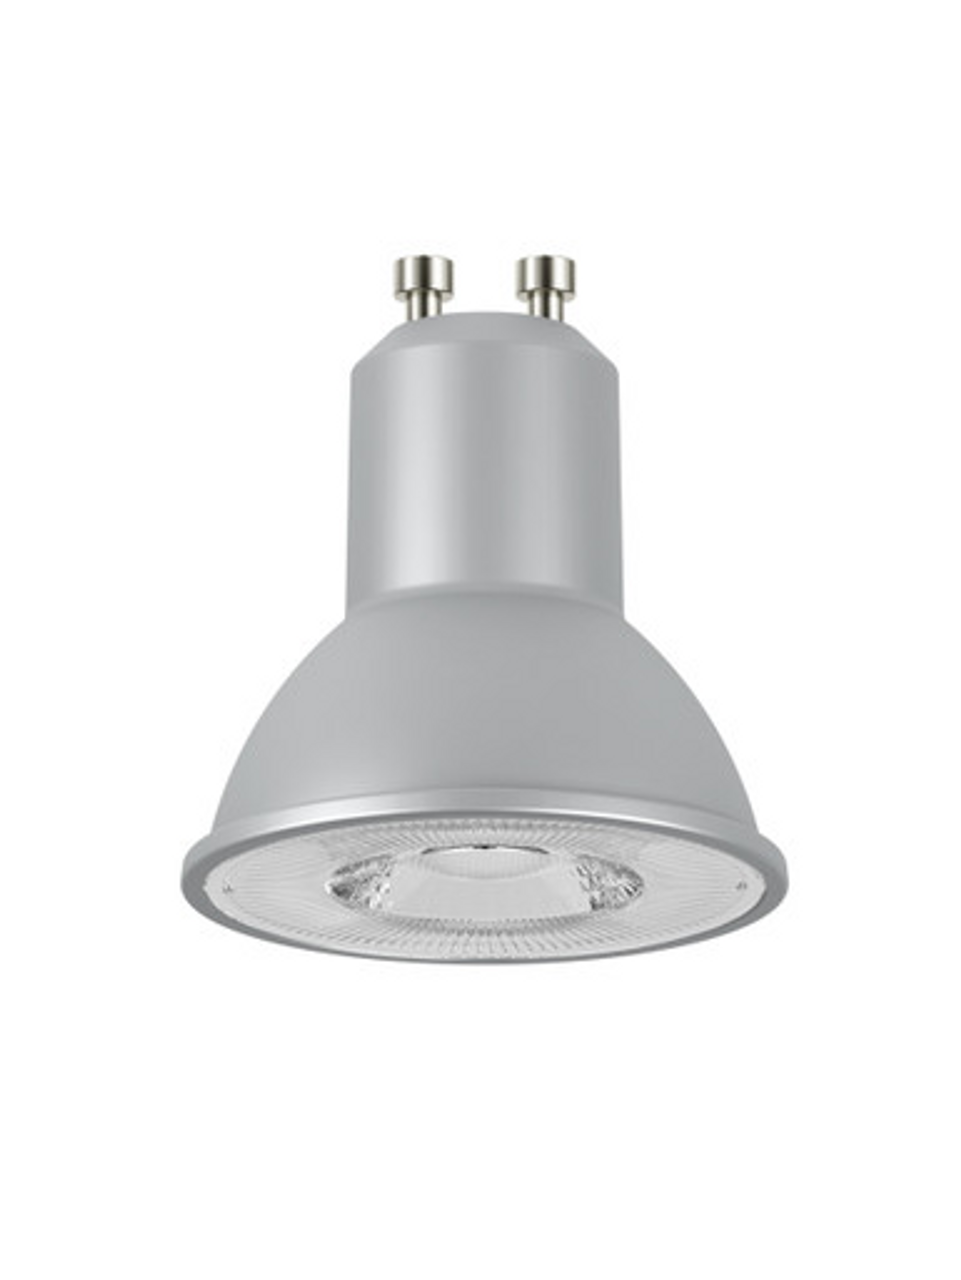 LED GU10 3.4W 315LM 3000K Non Dimmable Silver